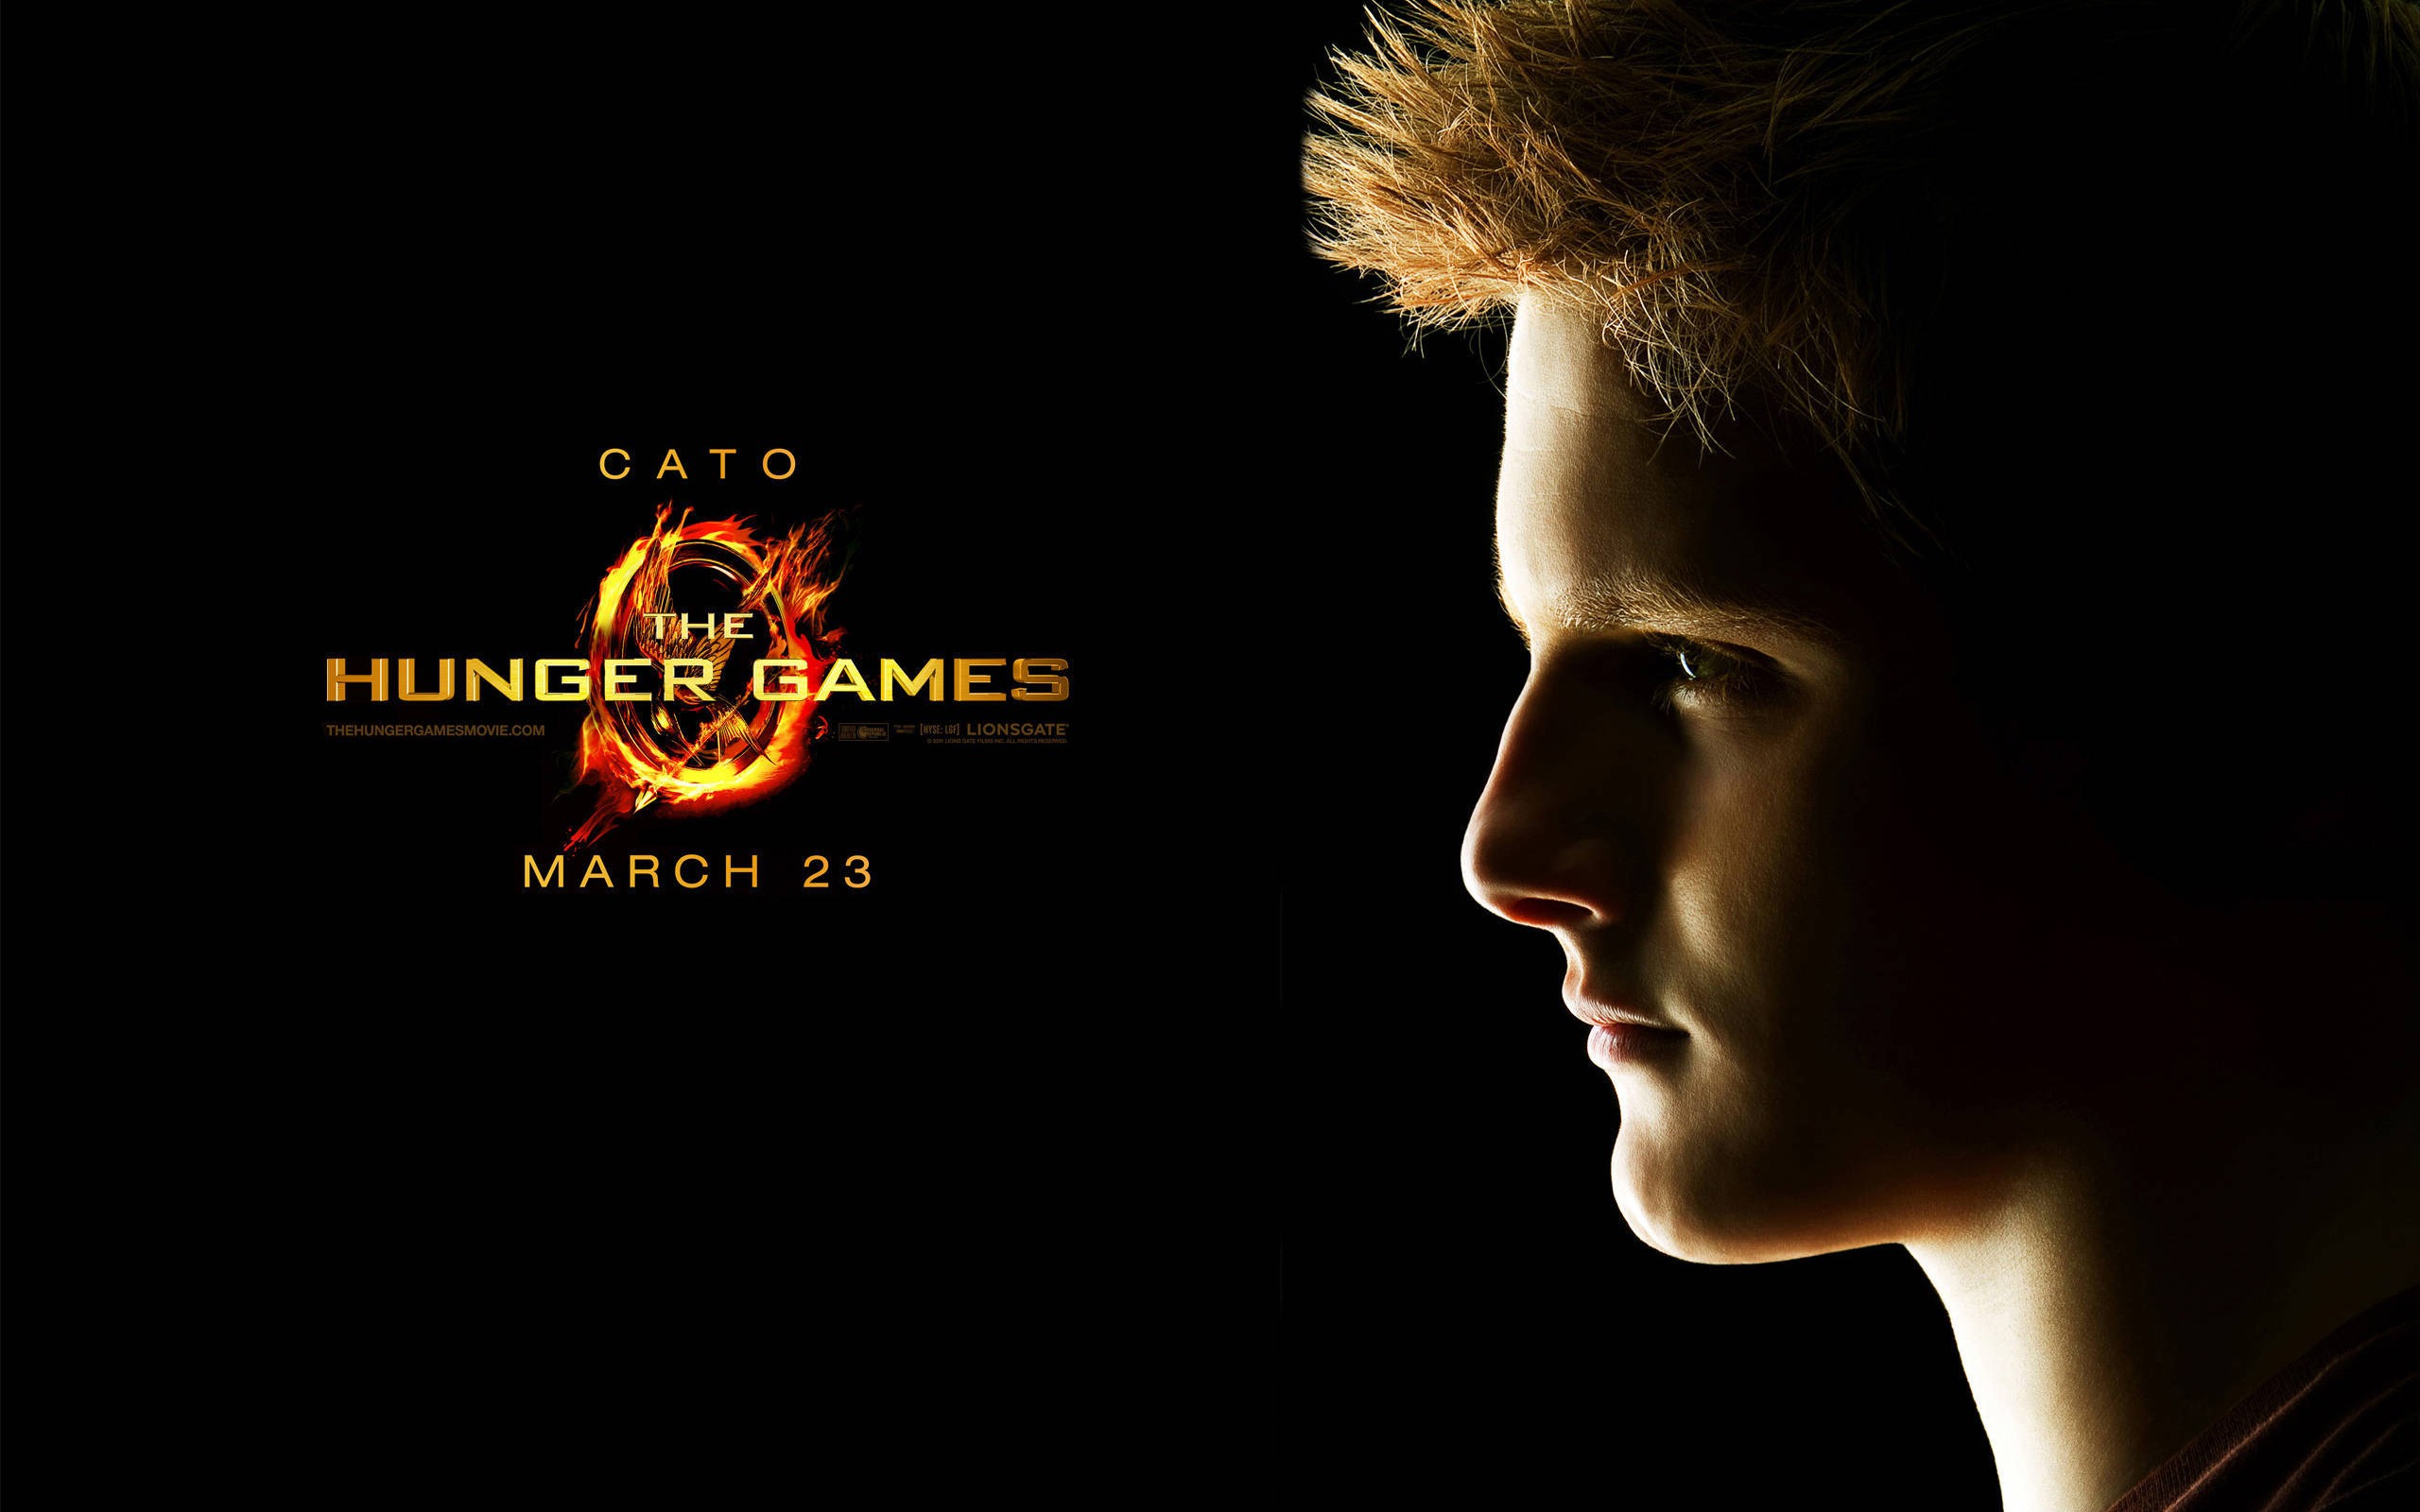 The Hunger Games HD wallpapers #3 - 2560x1600